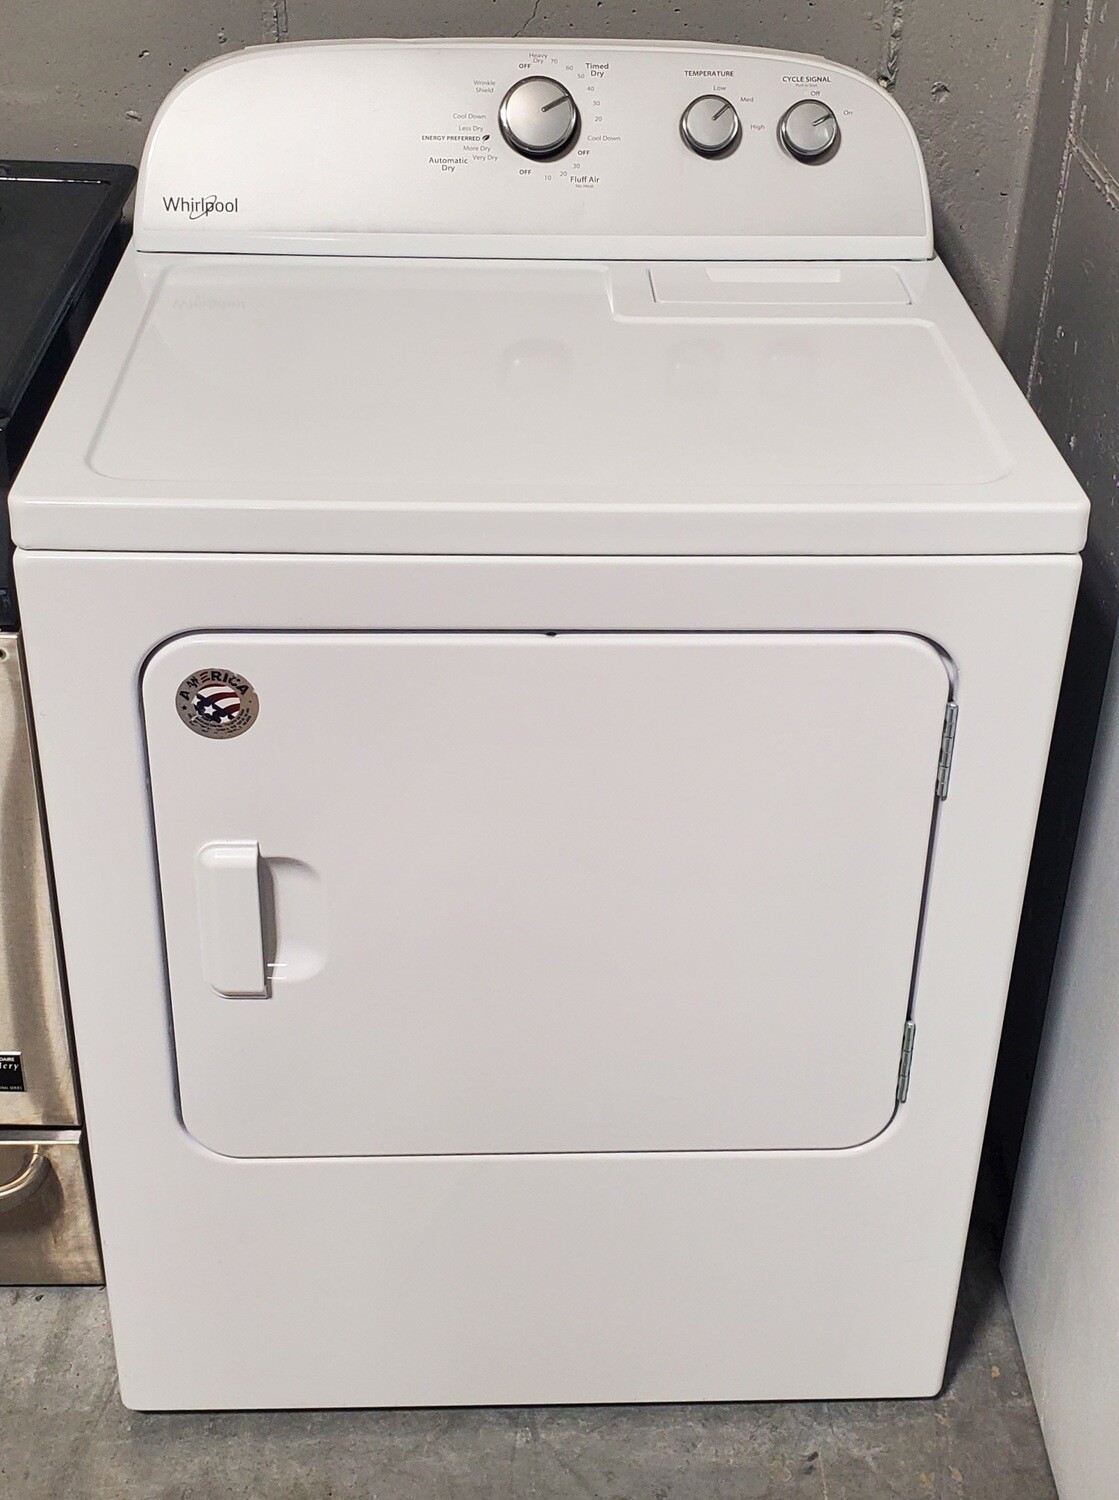 Whirlpool Large Capacity Heavy Duty Electric Dryer 29in. Wide